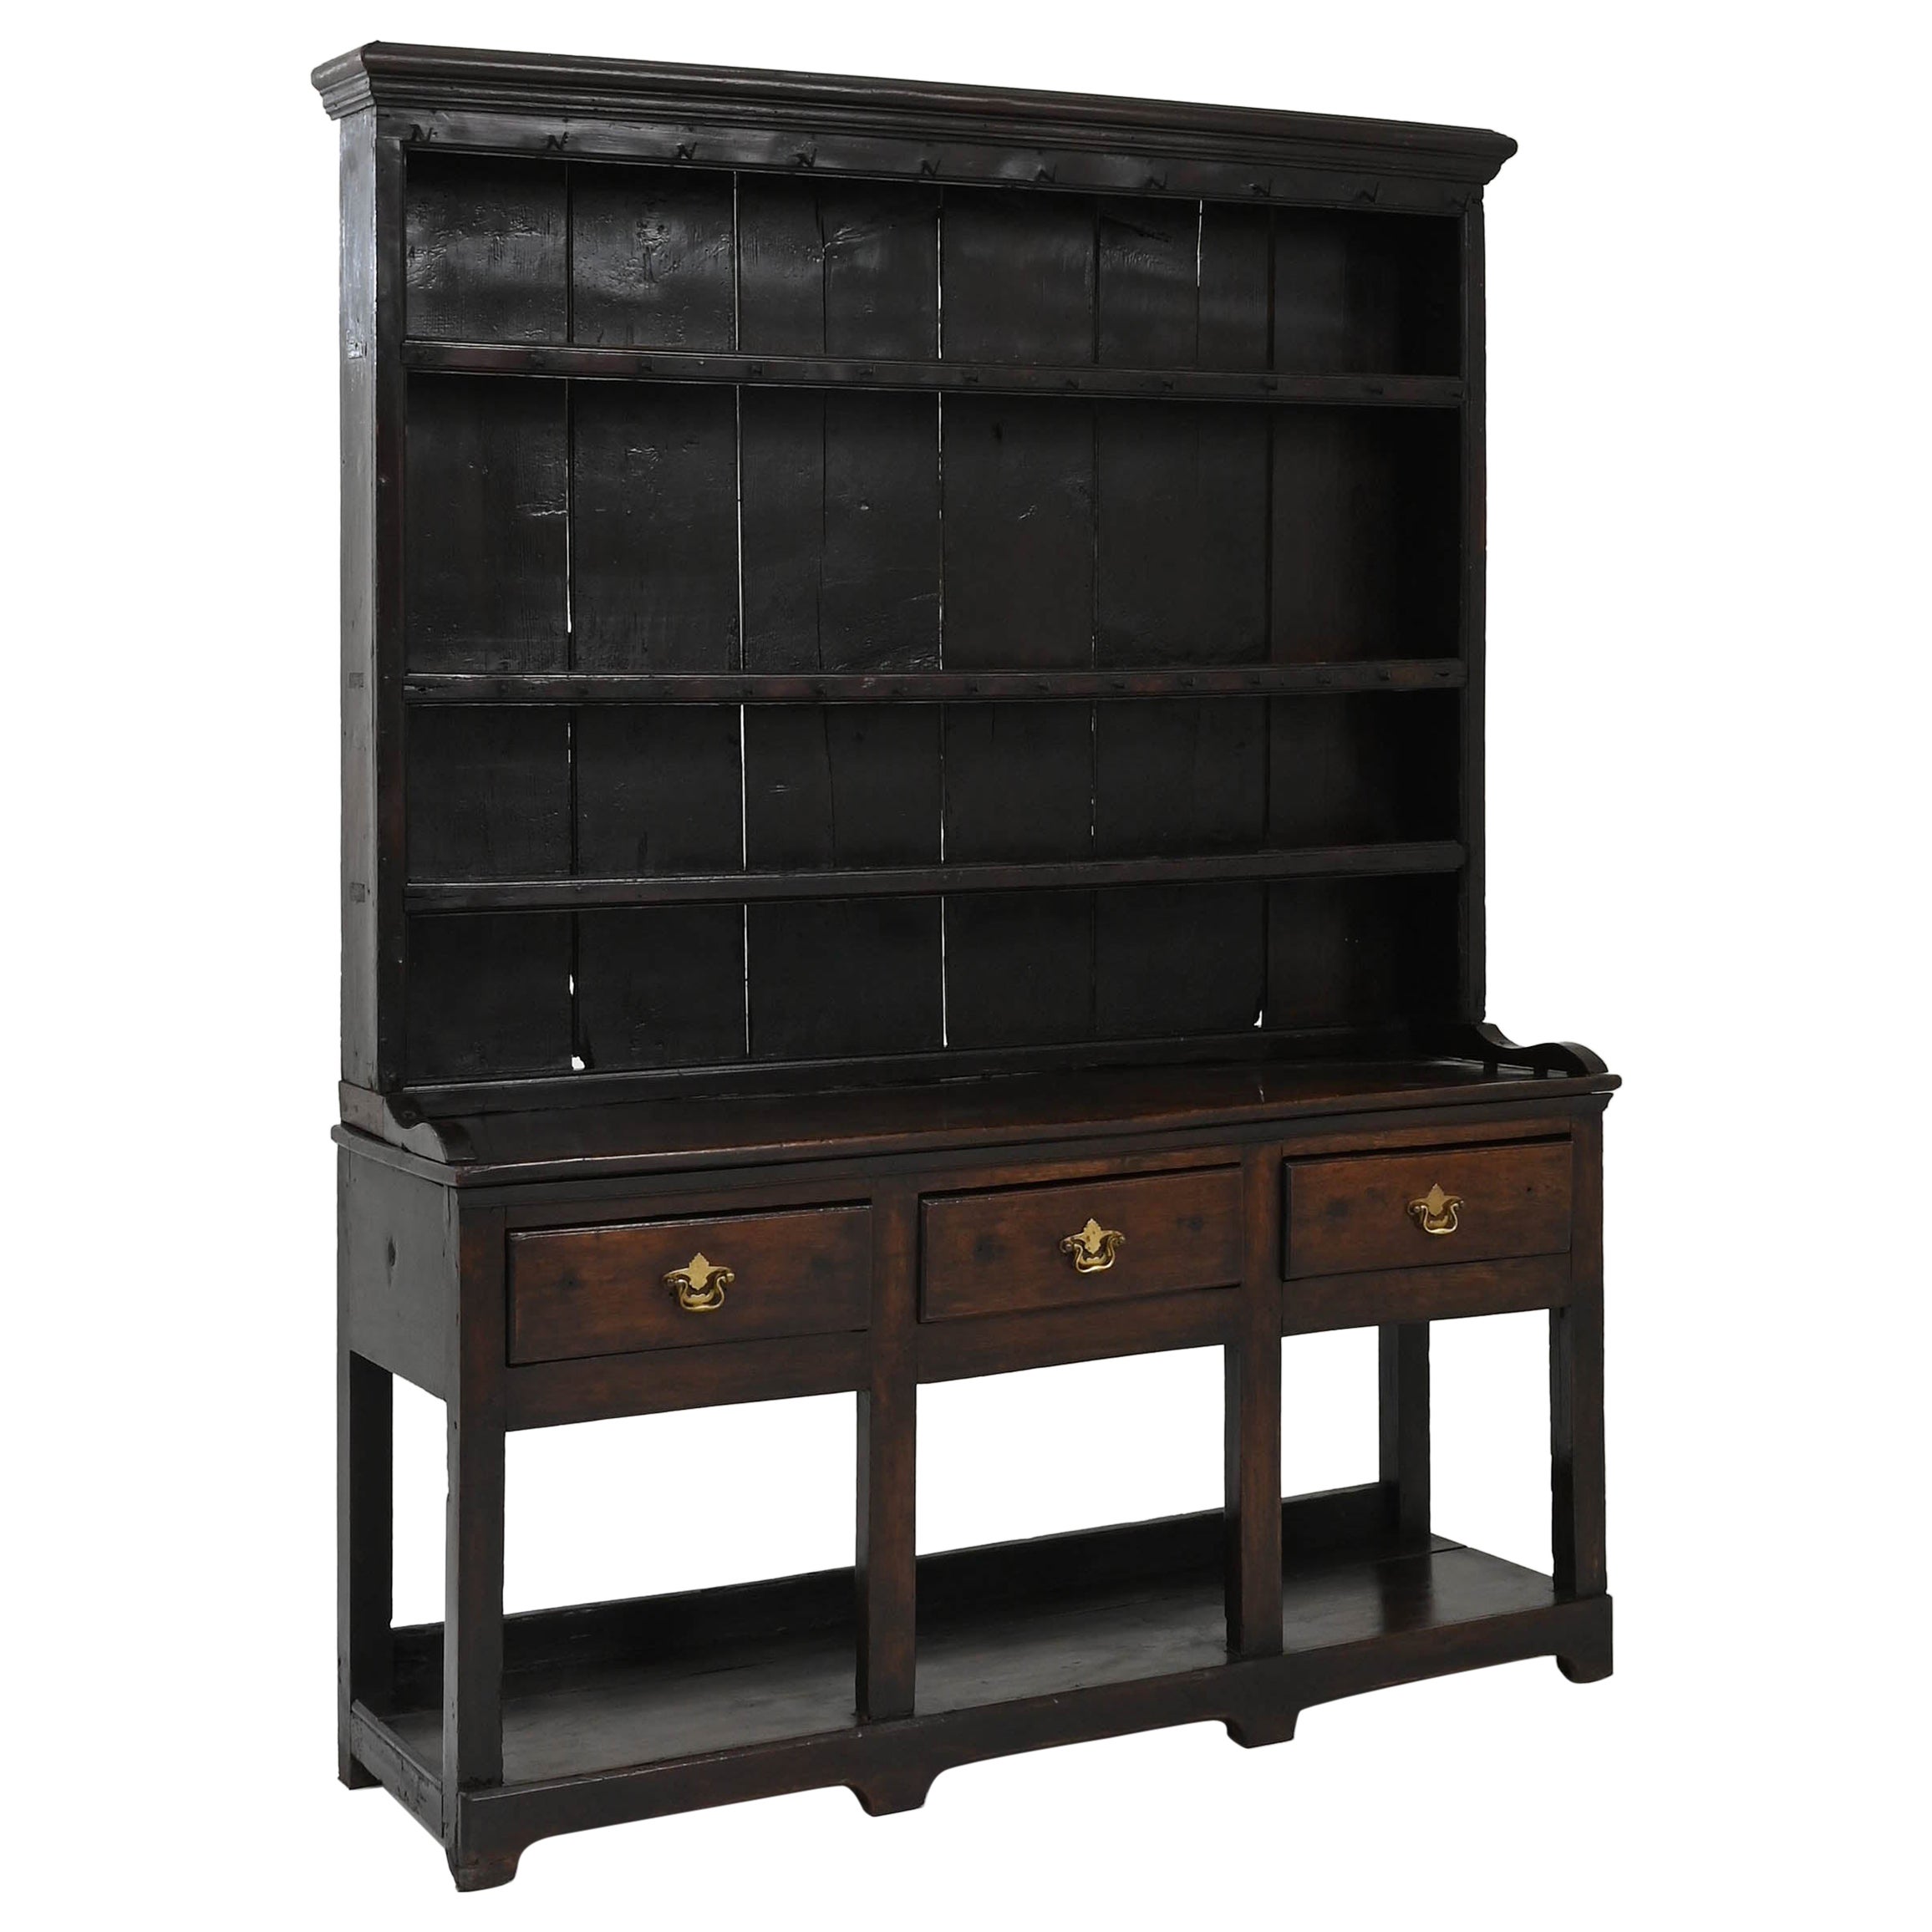 Early 19th Century English Wooden Cupboard For Sale